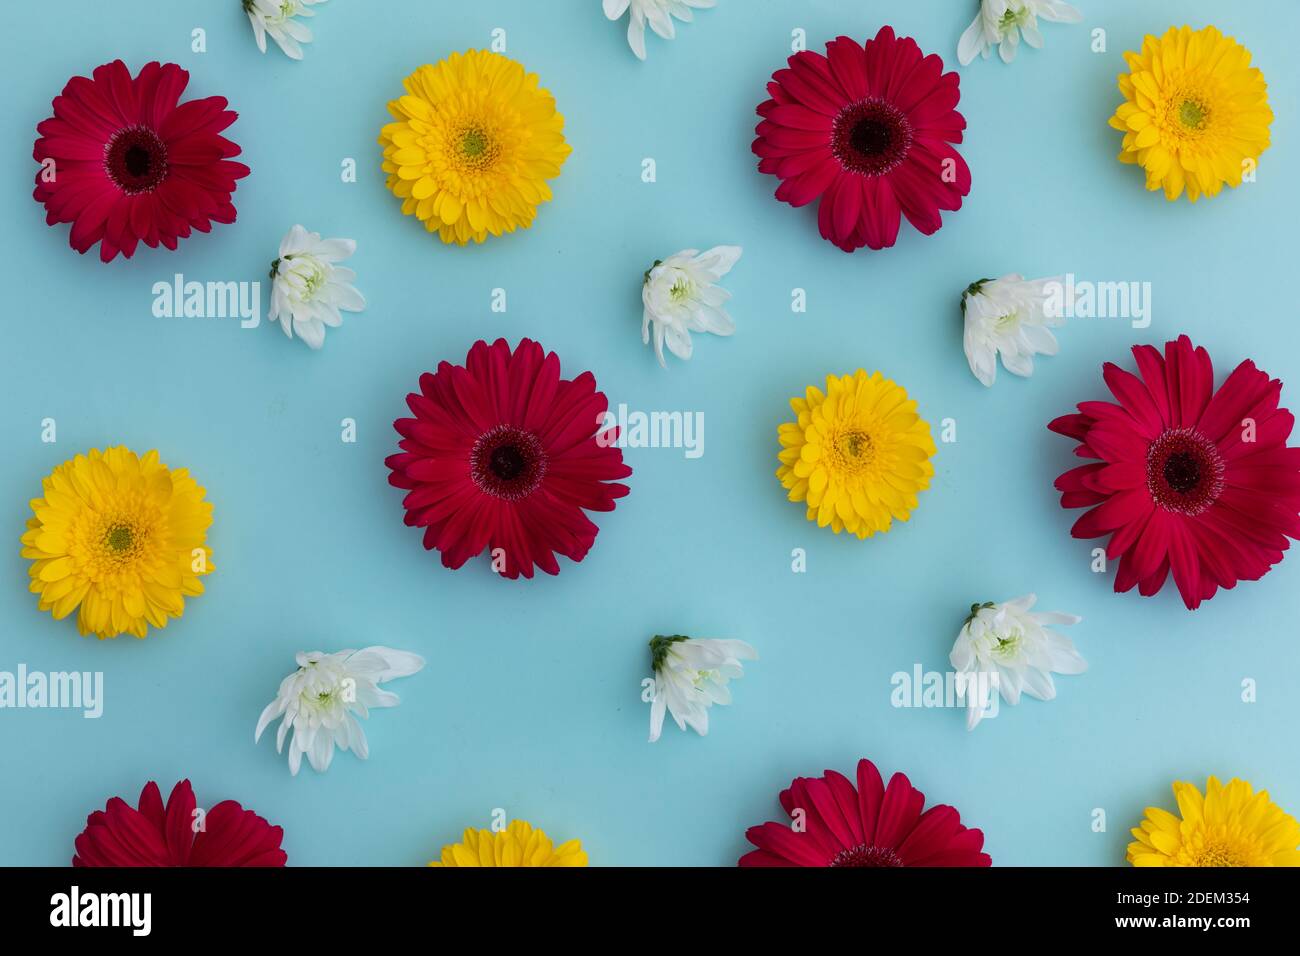 Yellow and red gerberas and white flowers on blue background Stock Photo